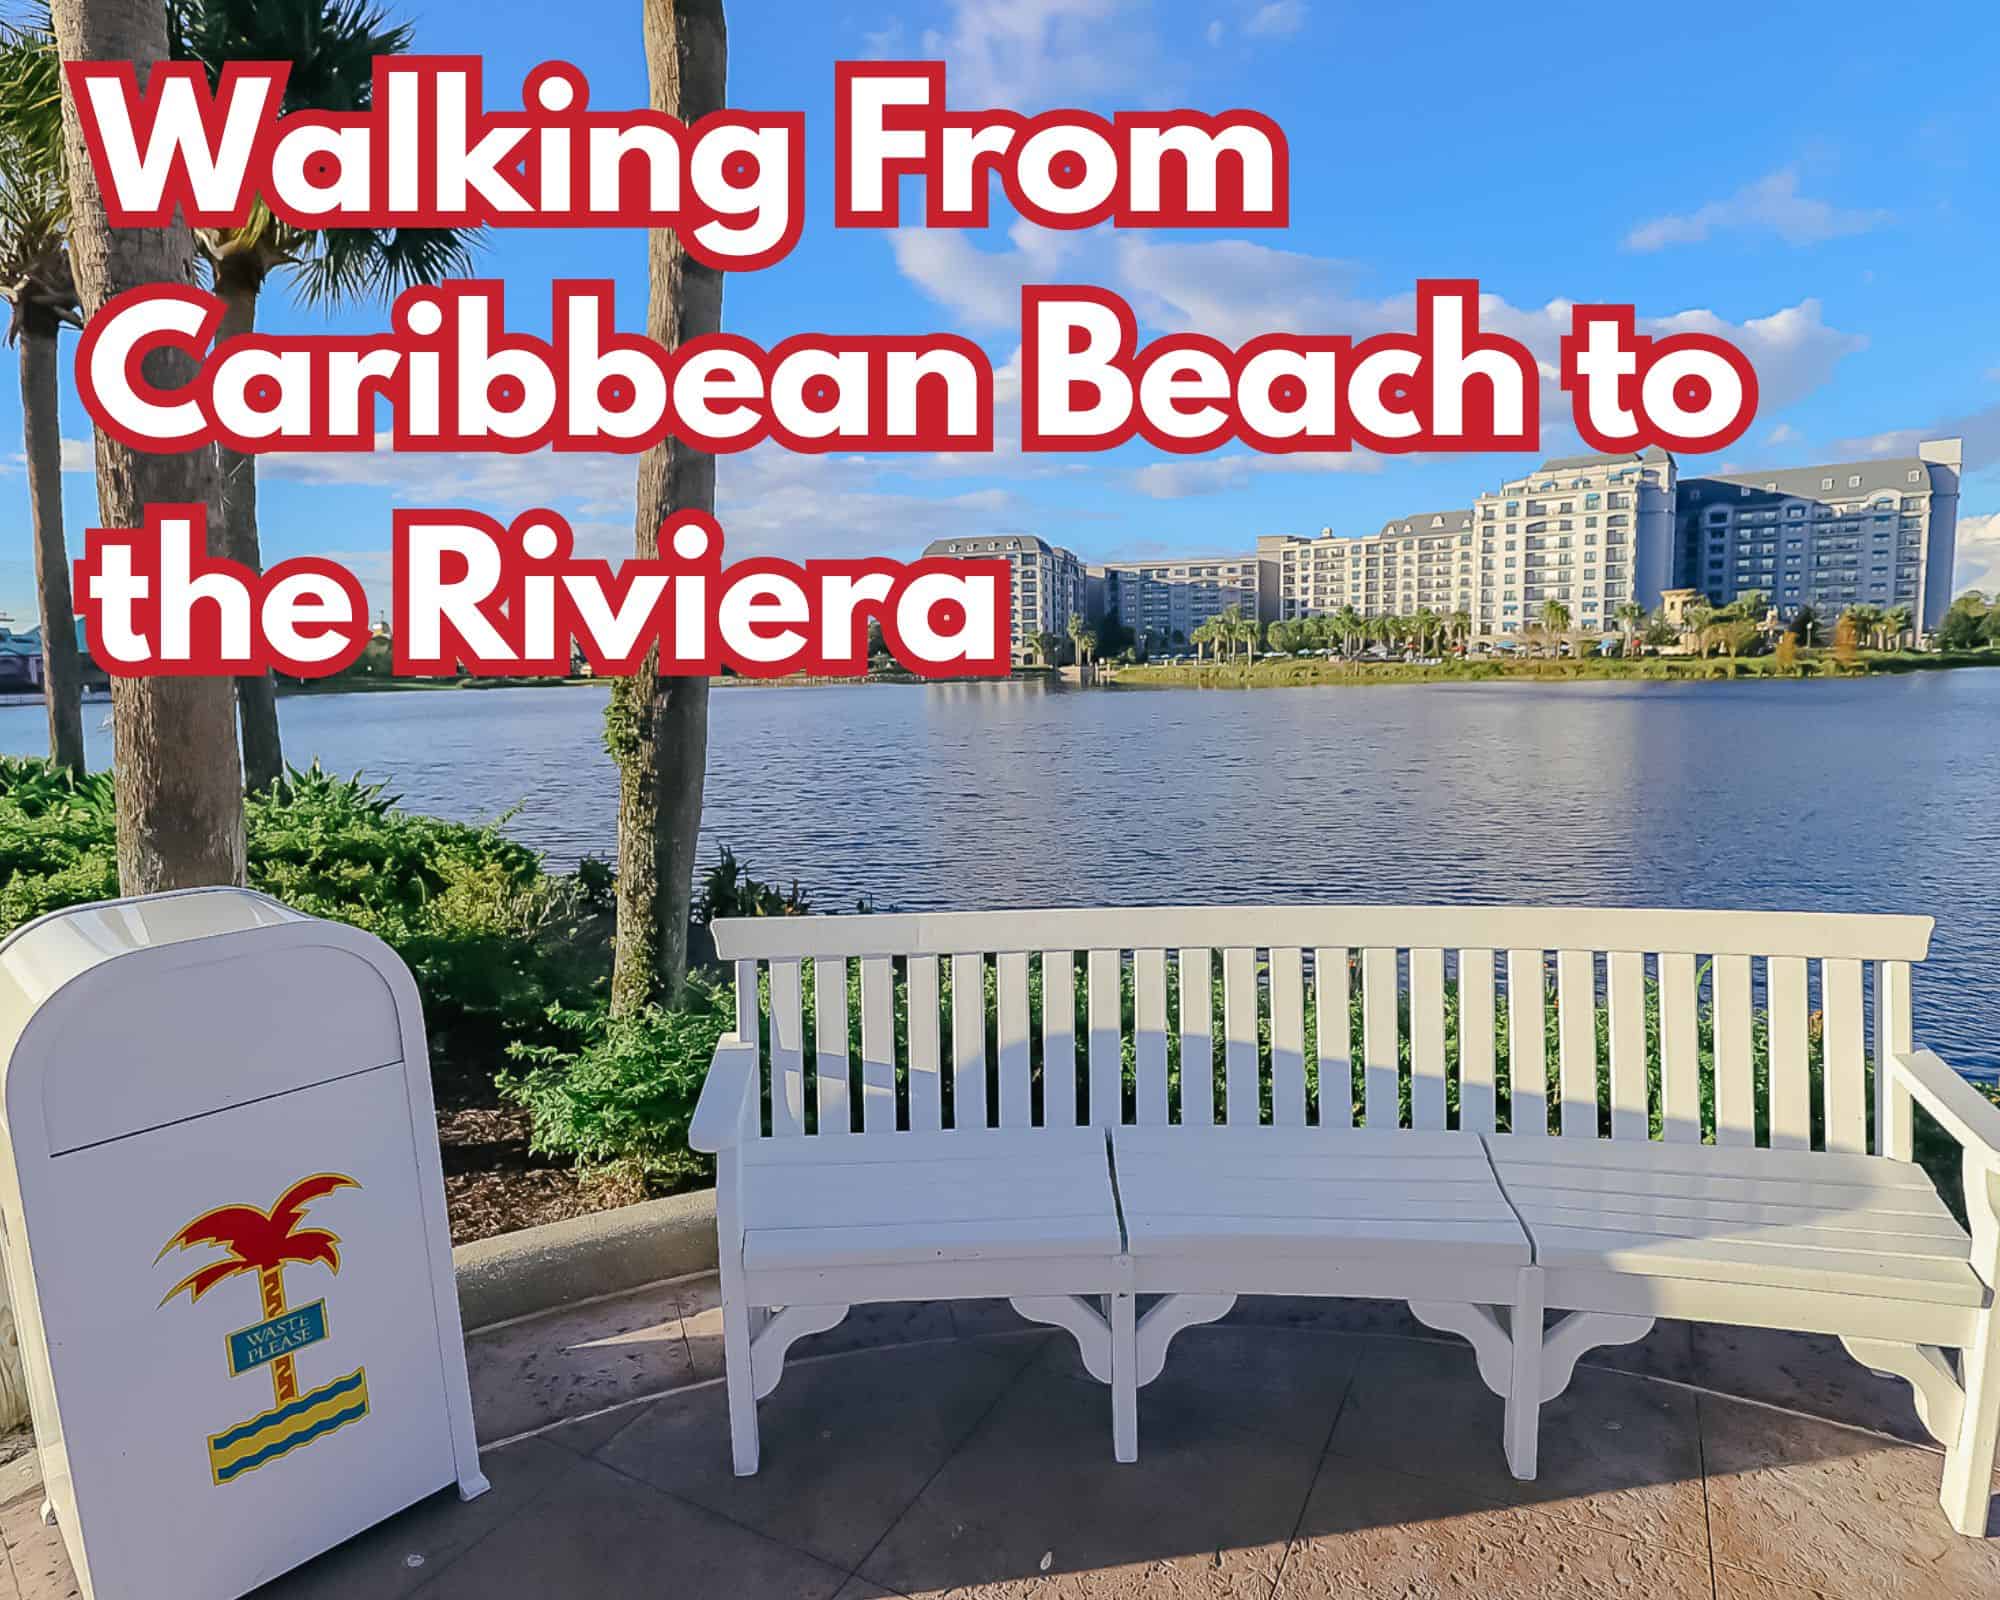 Walking from Caribbean Beach to Riviera